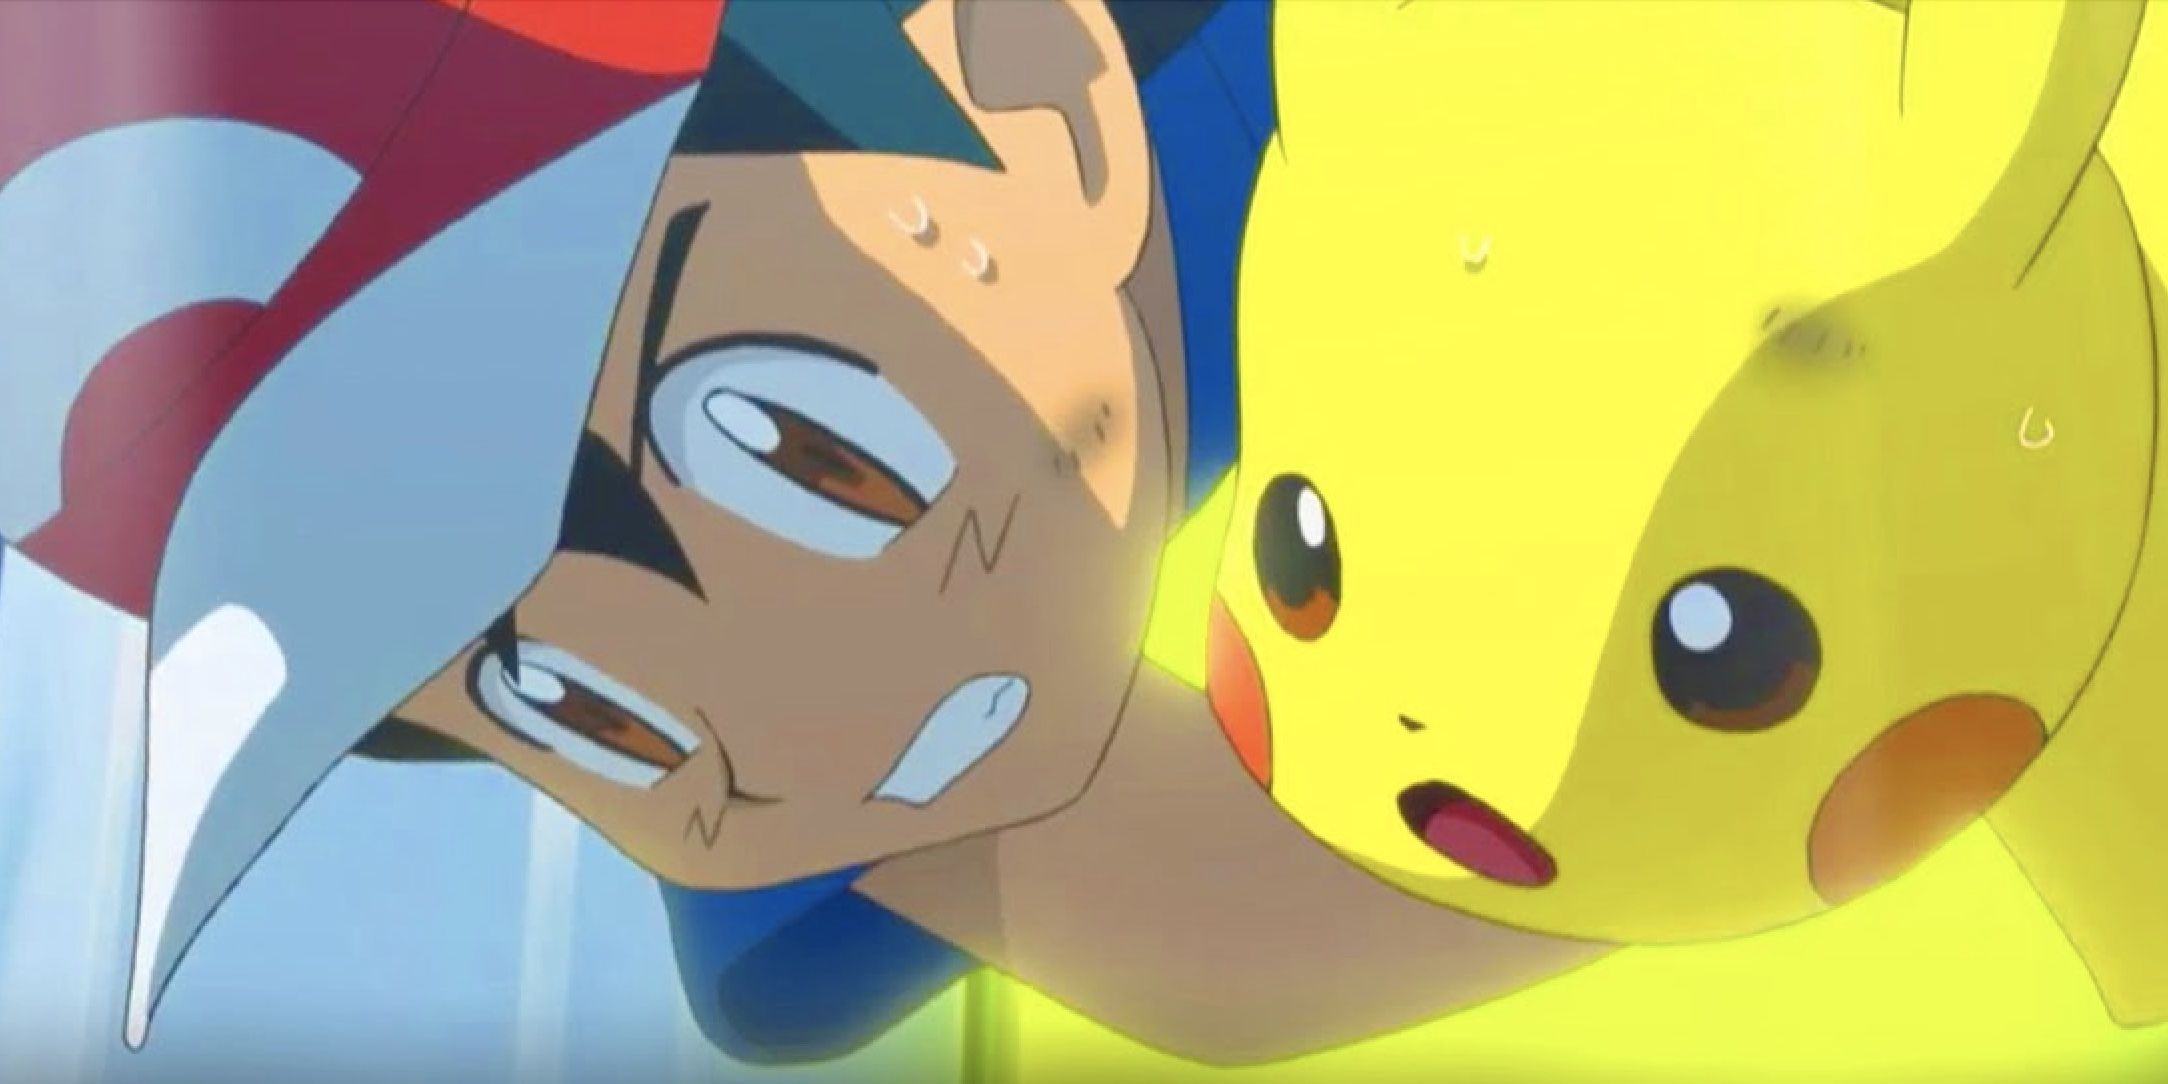 Ash jumping off a building to save Pikachu